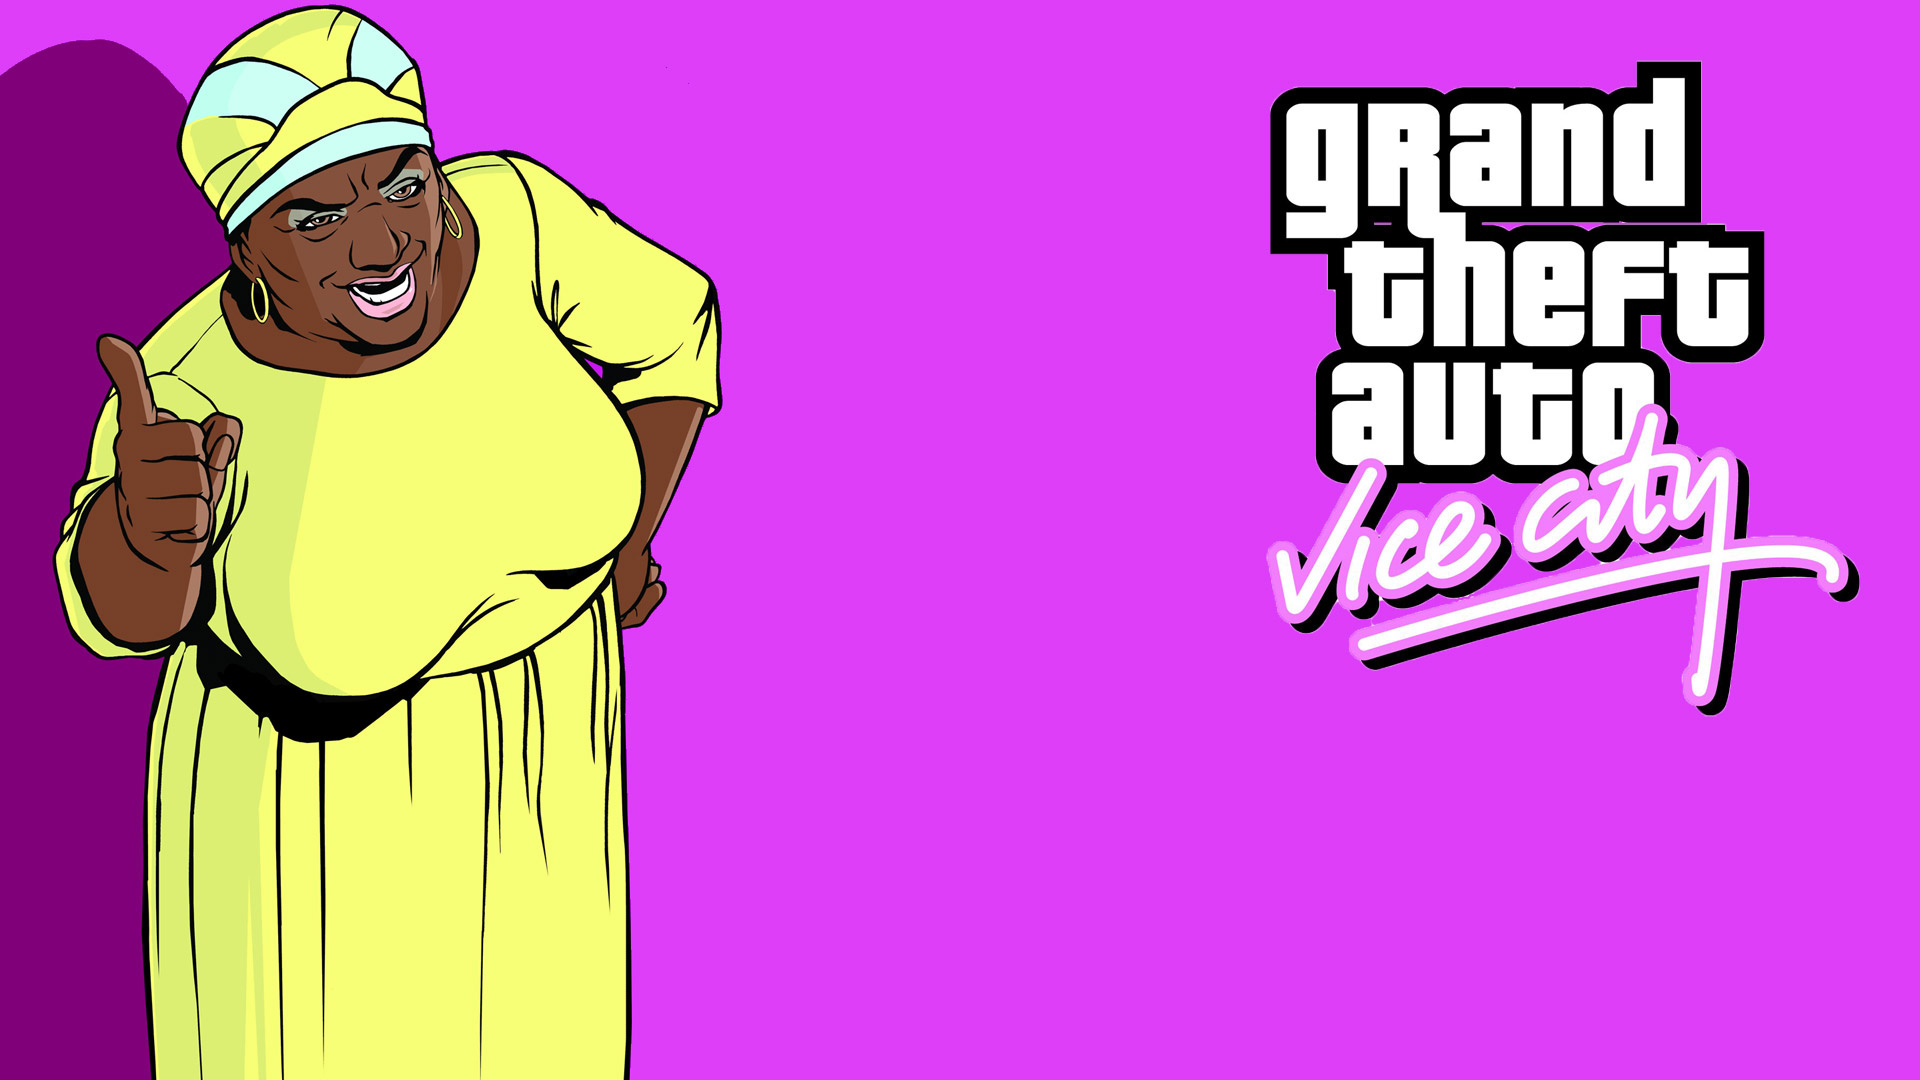 Vice City thrill, HD gaming wallpapers, Retro gaming bliss, IPhone XS Max, 1920x1080 Full HD Desktop